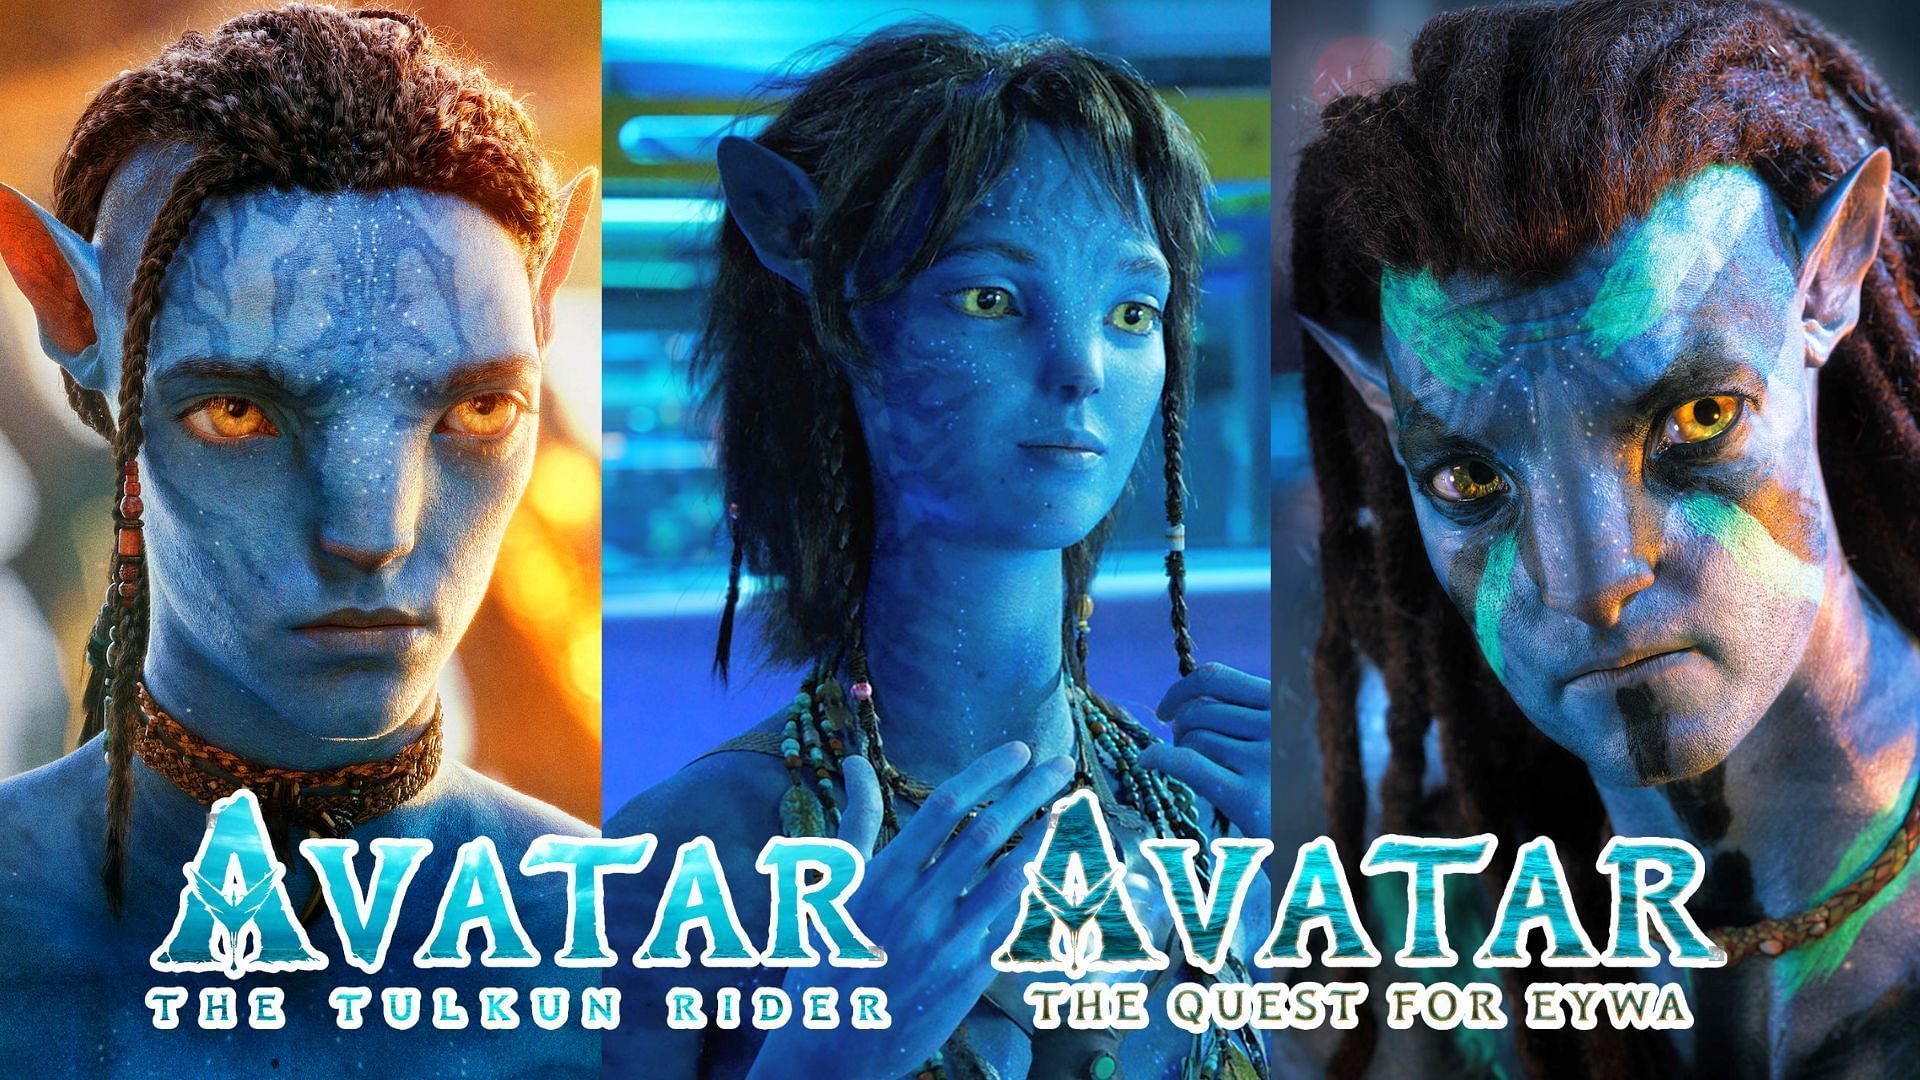 Scenes From Avatar 3  Avatar 4 Already Shot to Avoid Aging Out